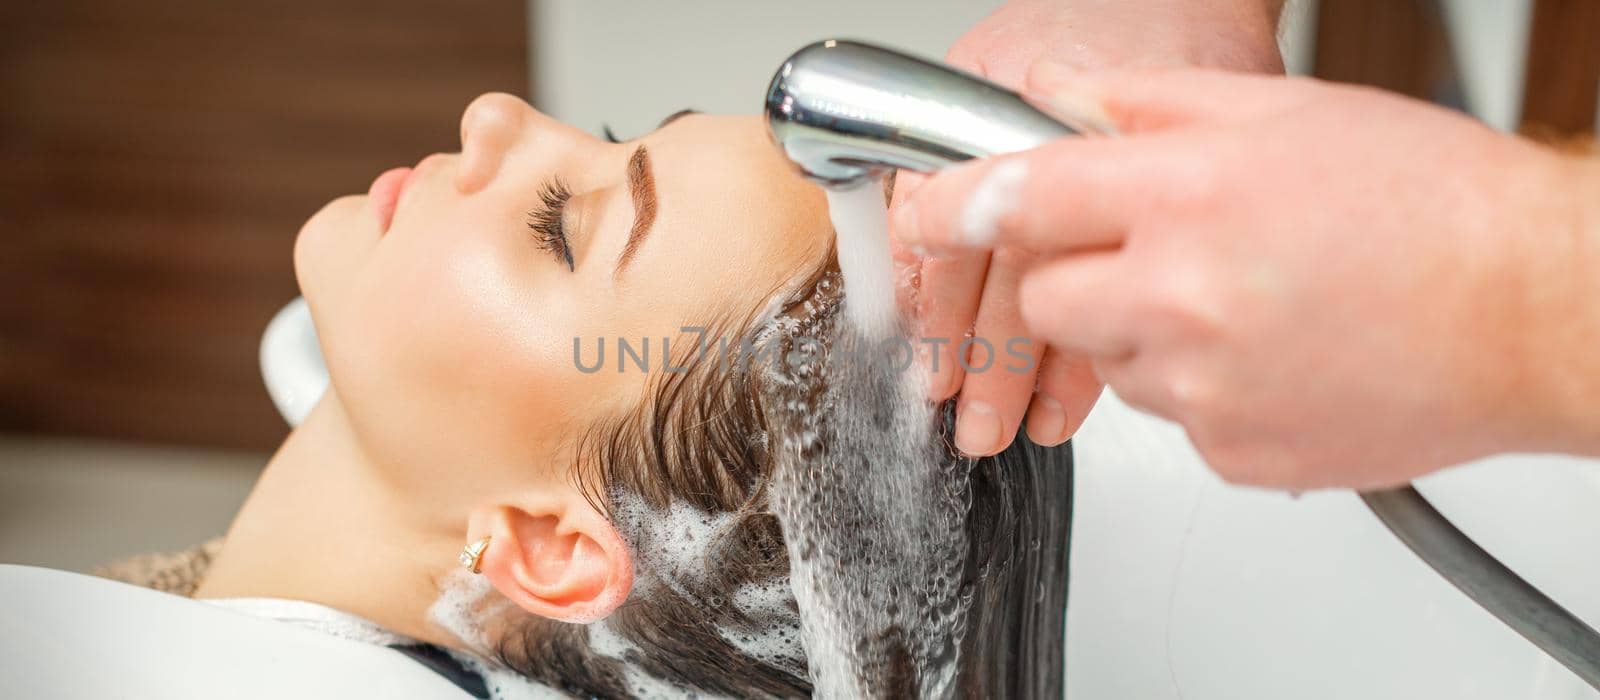 Close up of hands of hairdresser washing hair of woman in sink at beauty salon